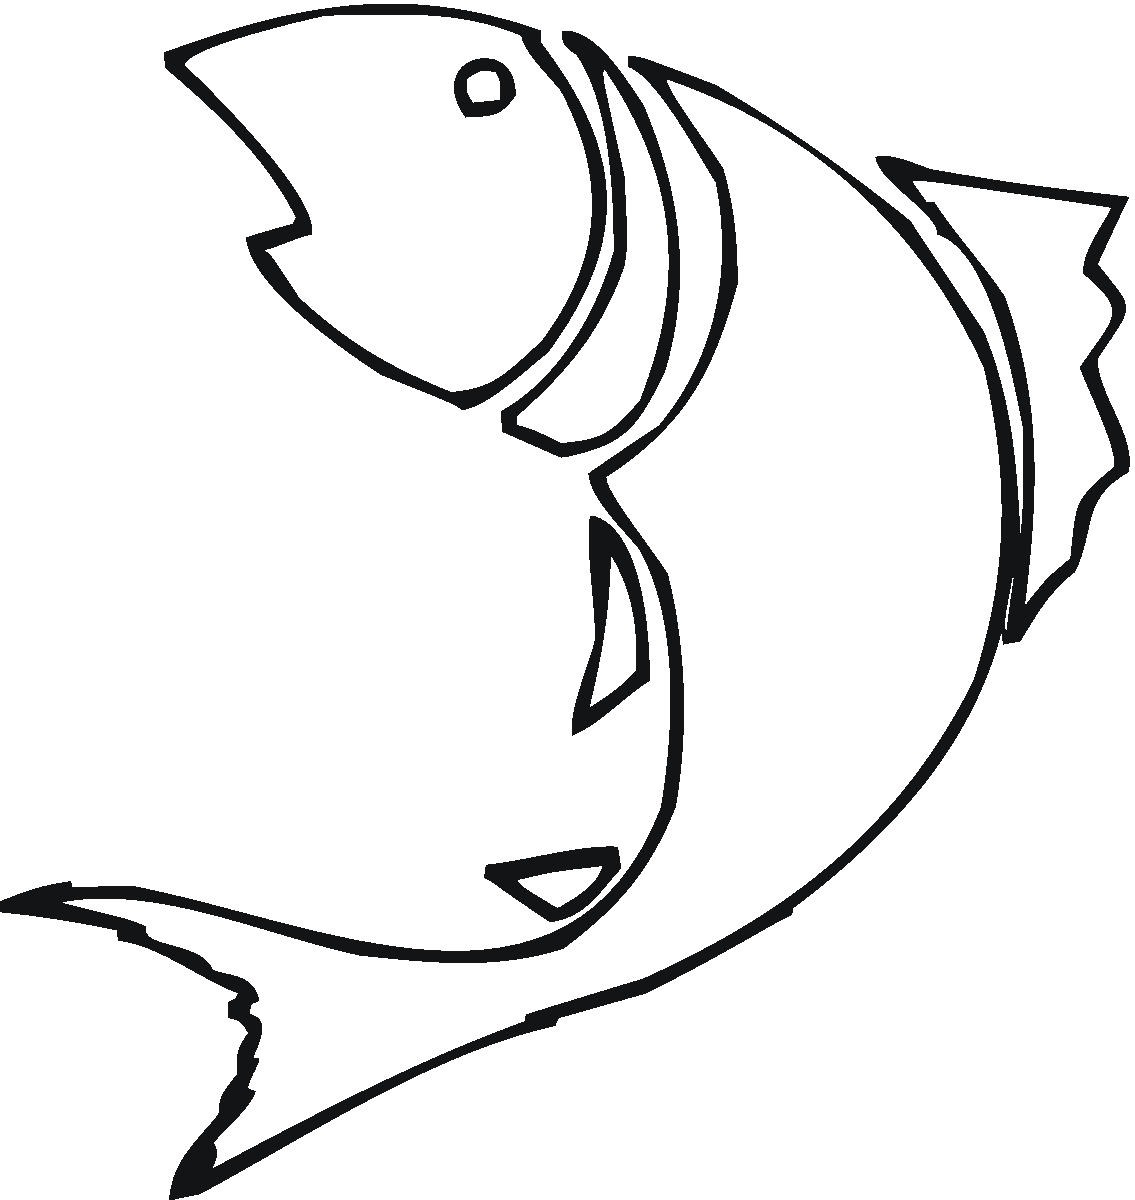 Line Drawing Of A Fish - ClipArt Best